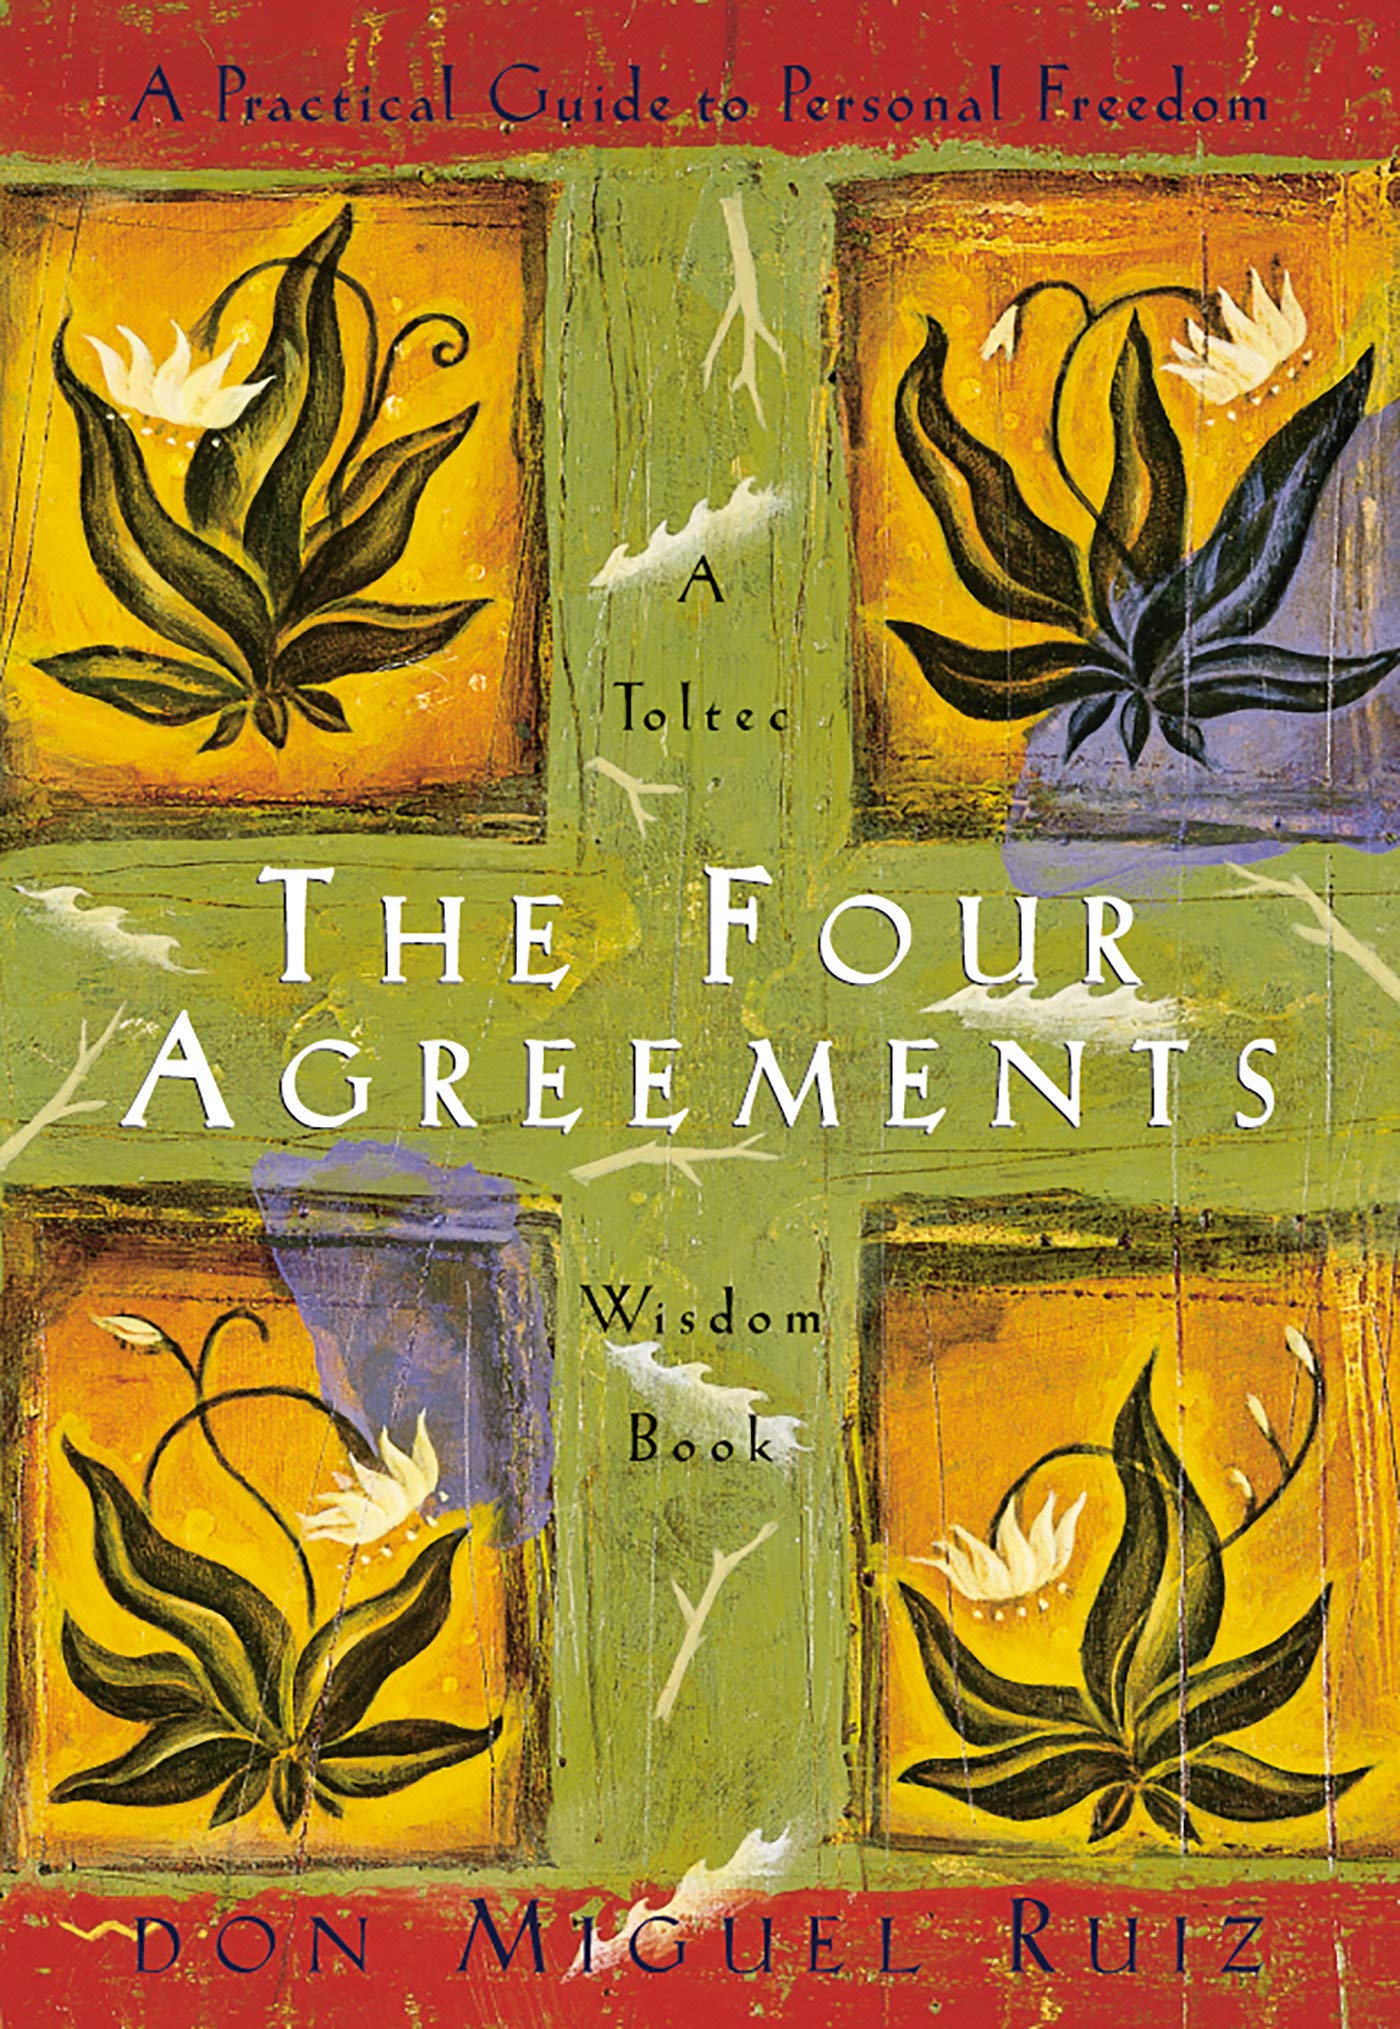 The Four Agreements: A Practical Guide to Personal Freedom (Copy) (Copy)